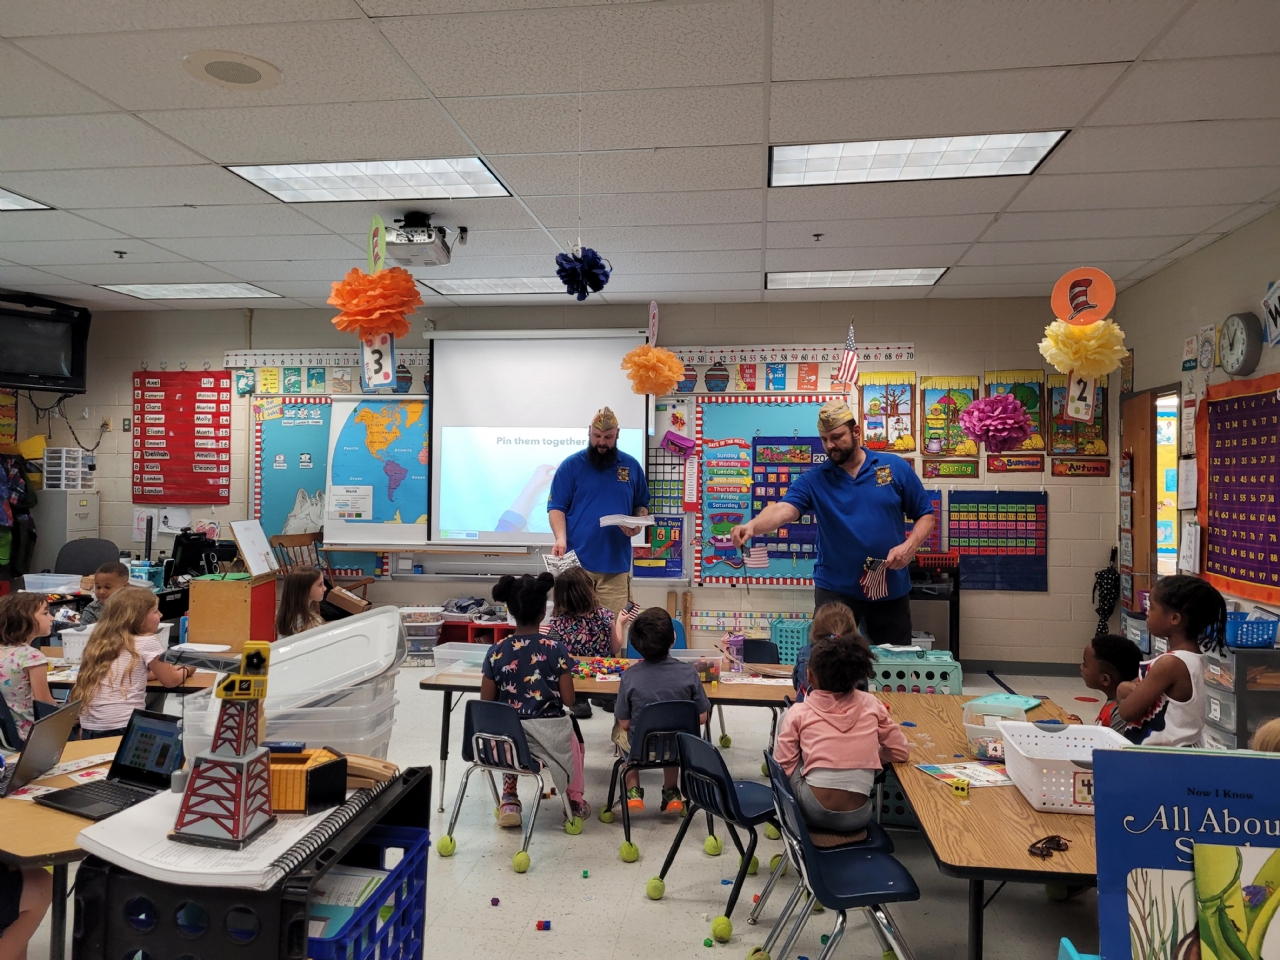 We had the opportunity to visit with the King George Elementary School Kindergarten Class and help them with their ABC Countdown. 19MAY2022 was U for United States Day and we handed out small American flags and patriotic coloring books to every student.

Thank you to Mrs. Boyd for inviting us, we had a fantastic time talking with all of the students!